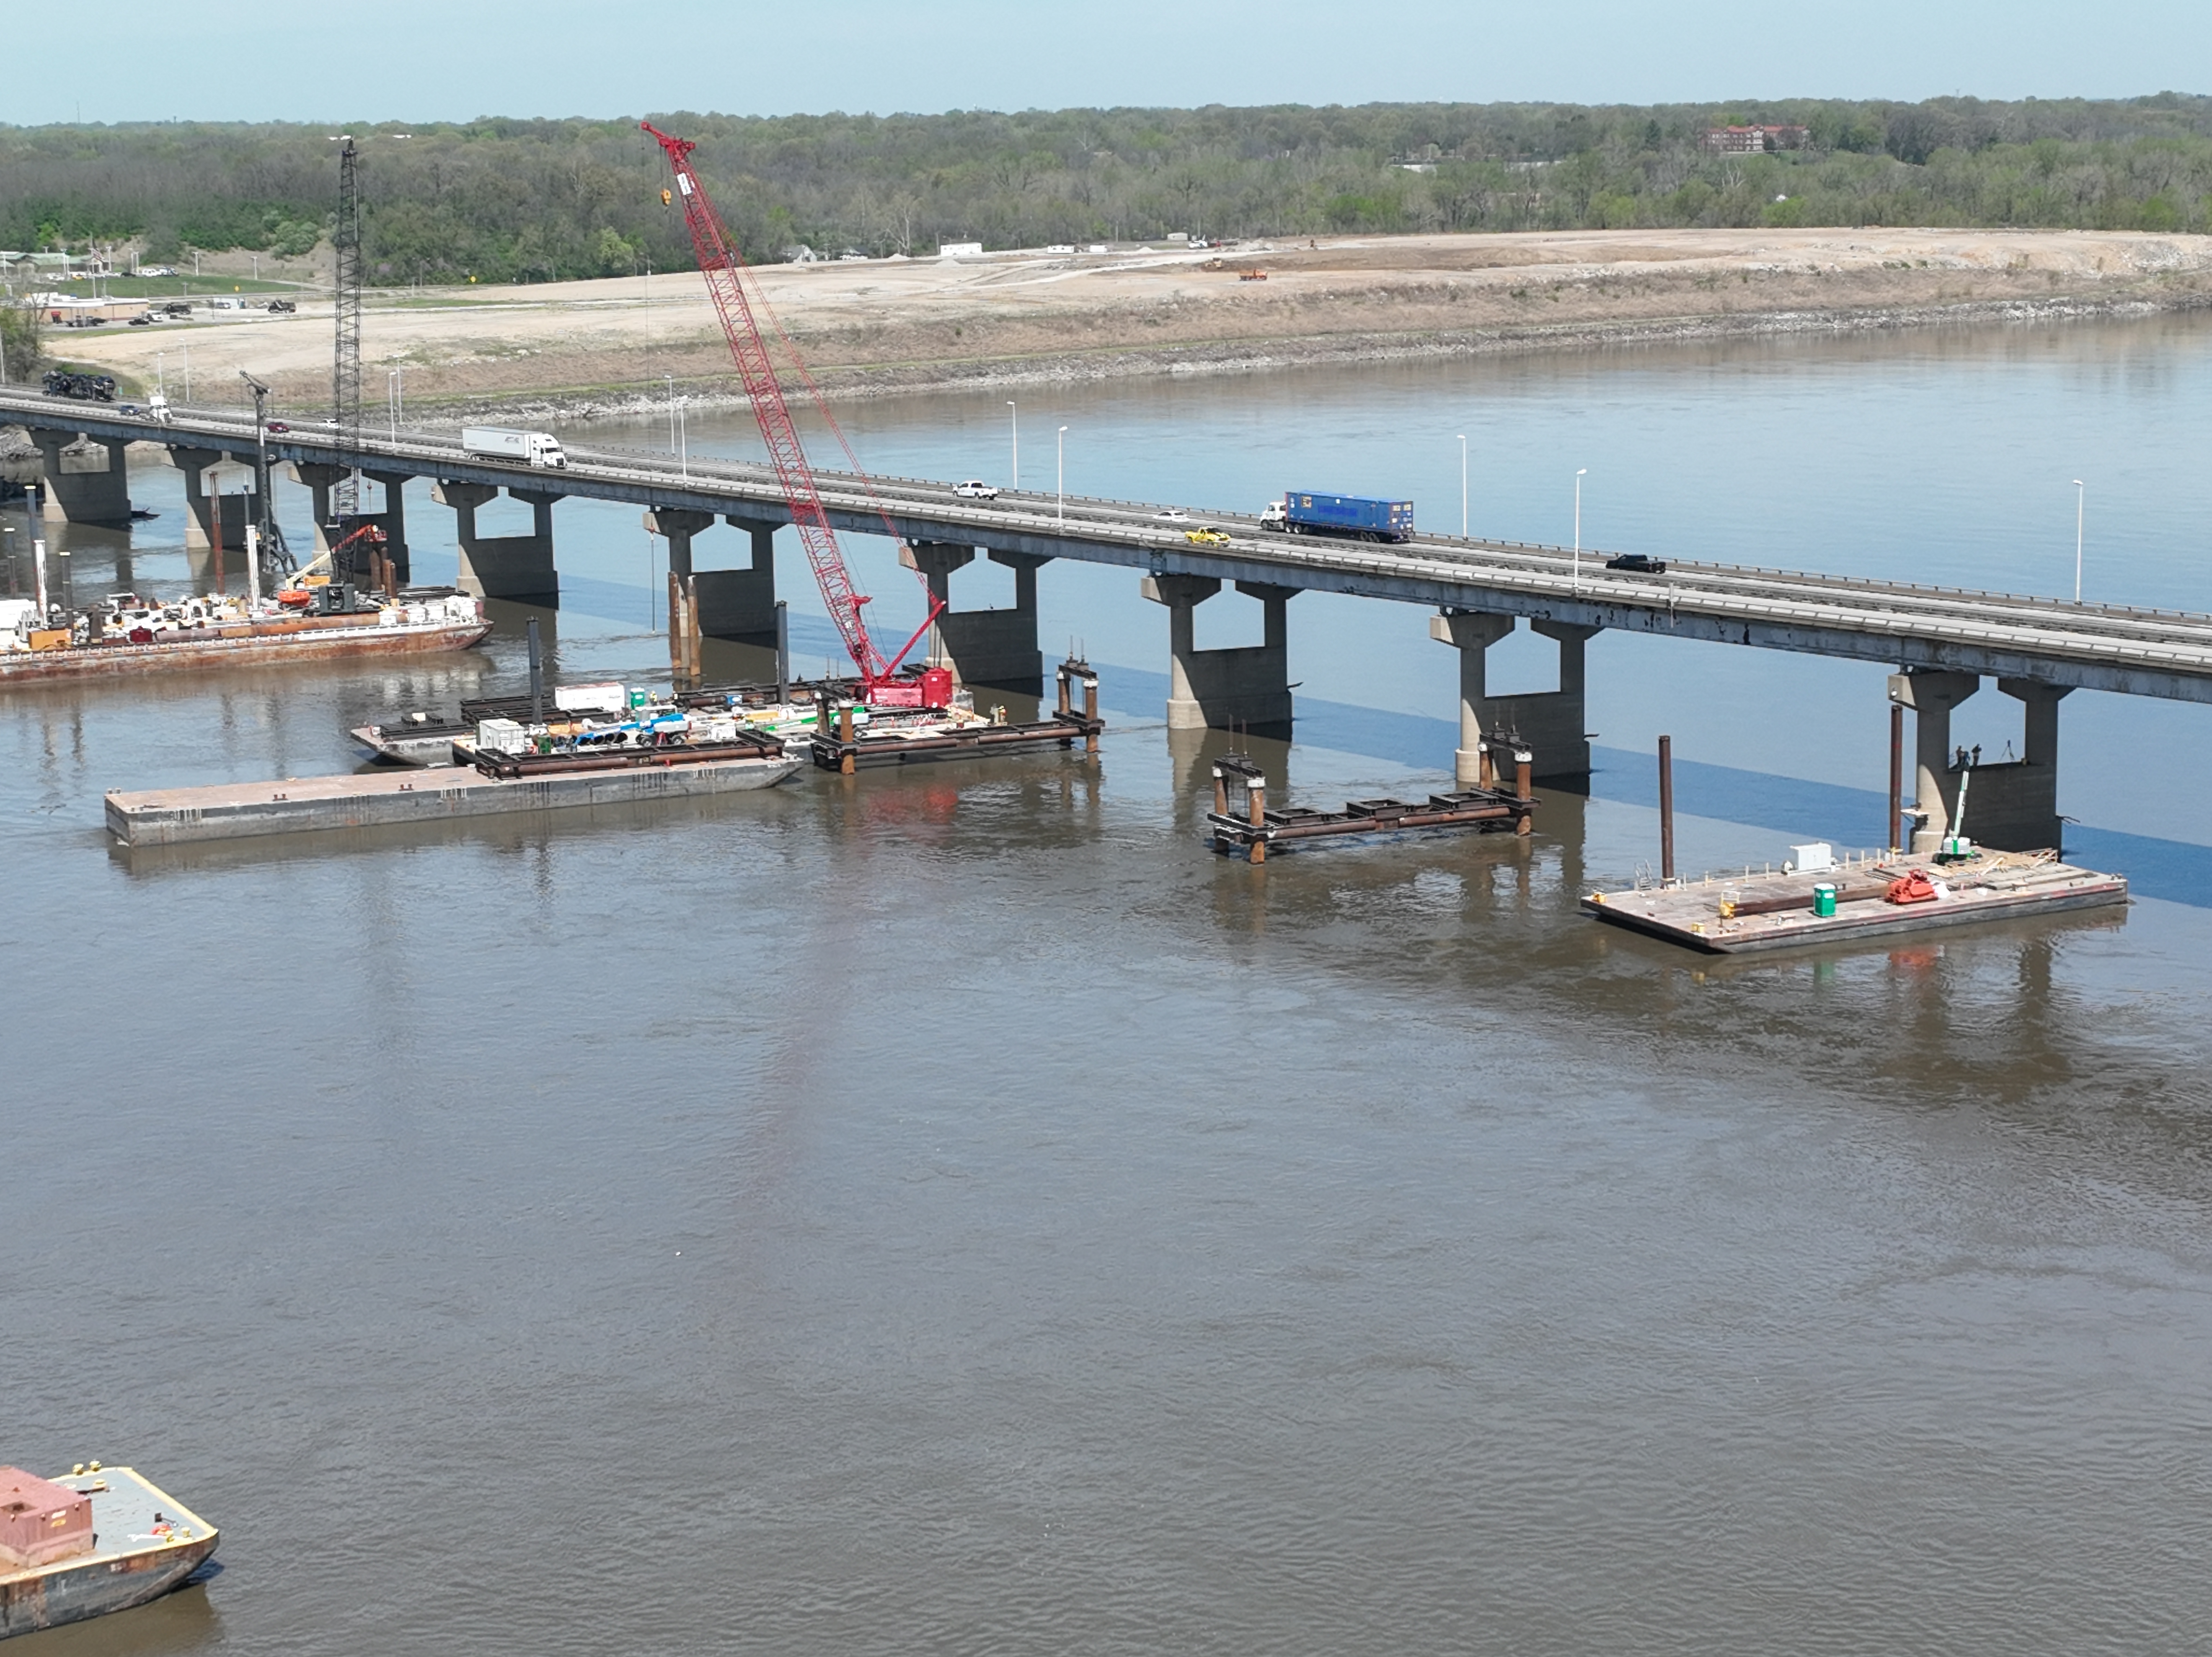 Aerial of barges in the river.